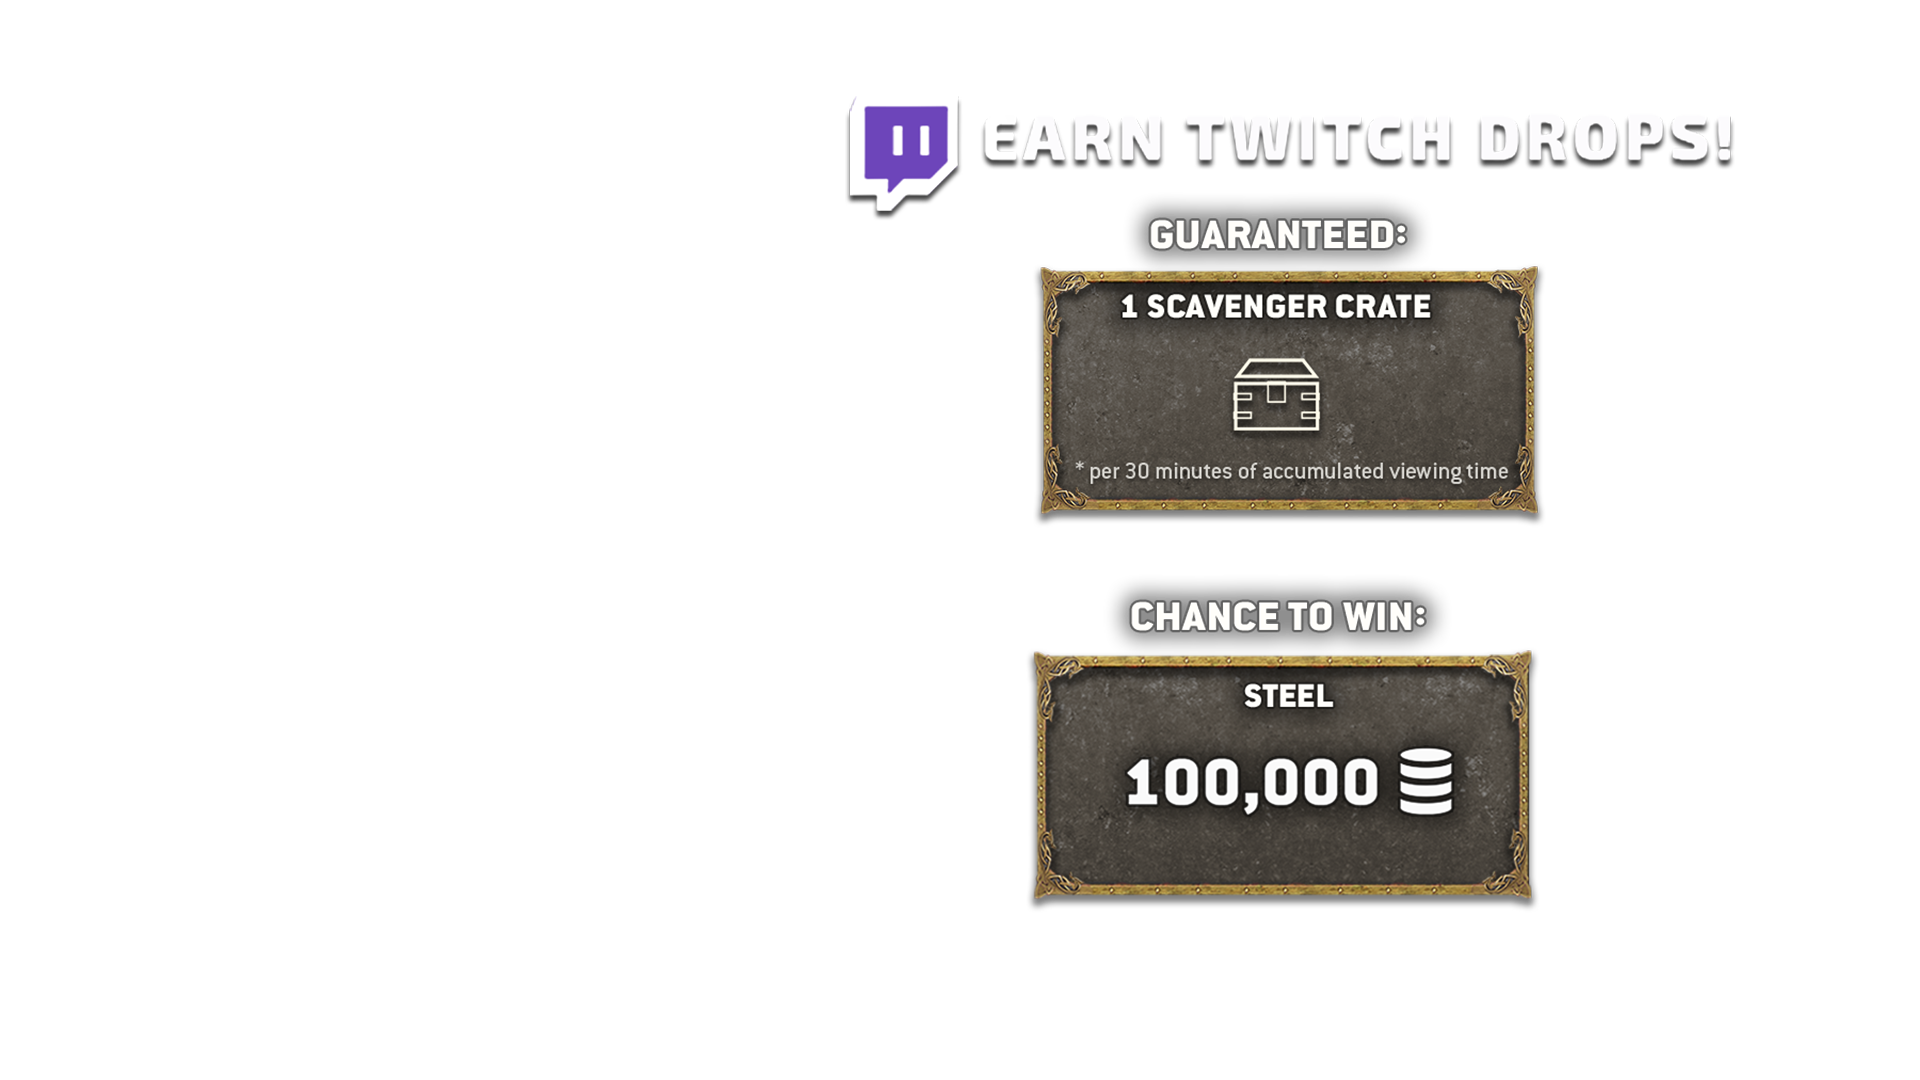 [FH] - News article - Twitch Drops - Y5S4 TwitchDropsGraphics 1Crate 100k Without10minAccumTime